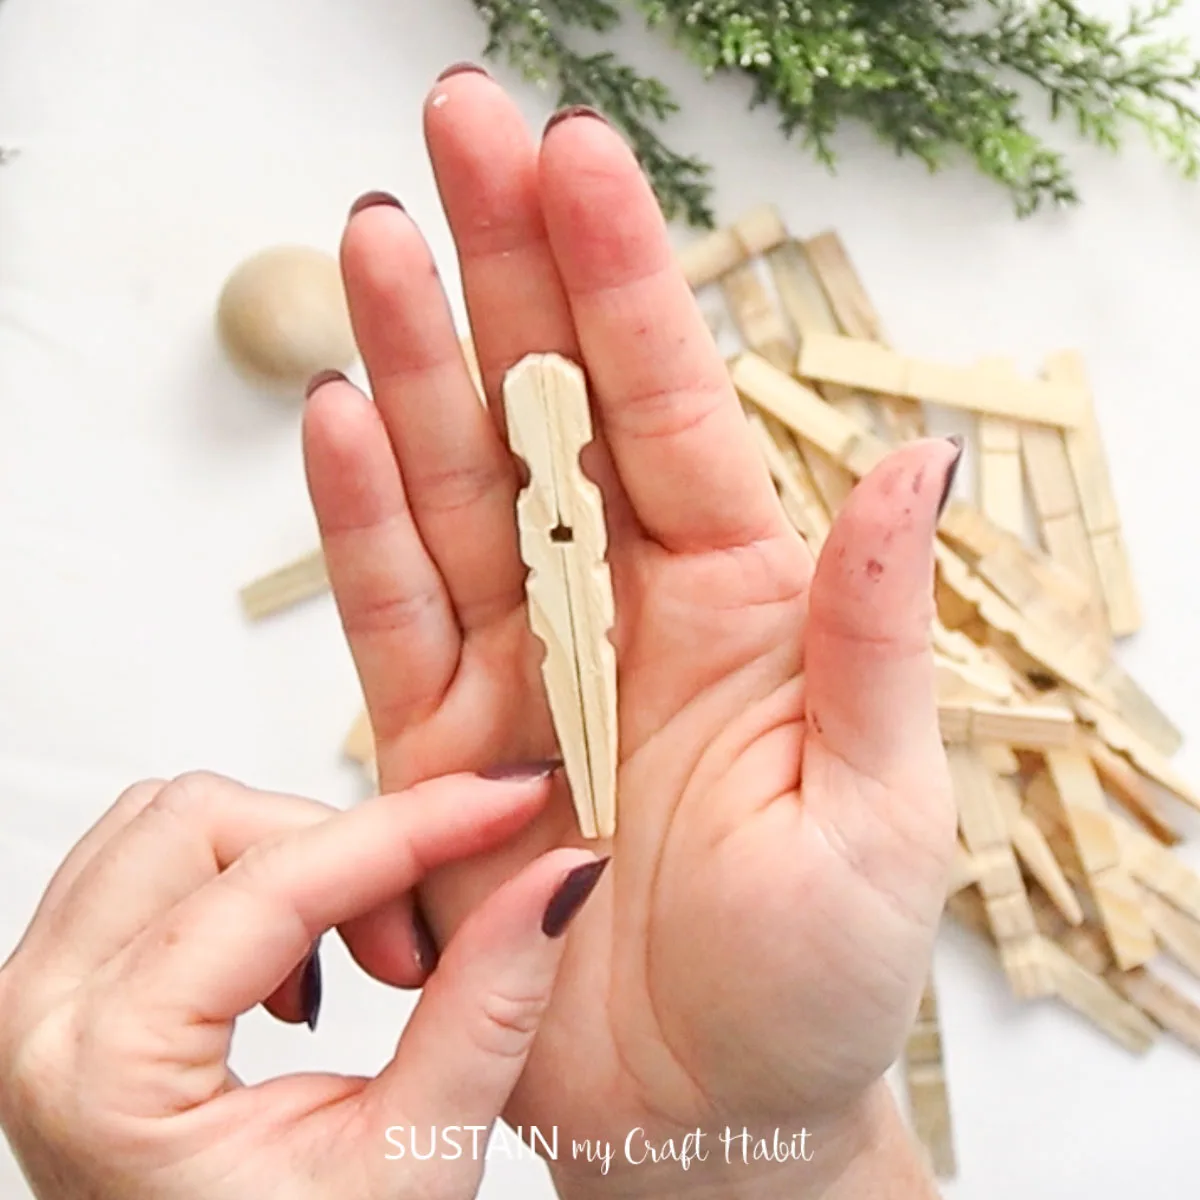 Gluing backs of clothespins together.